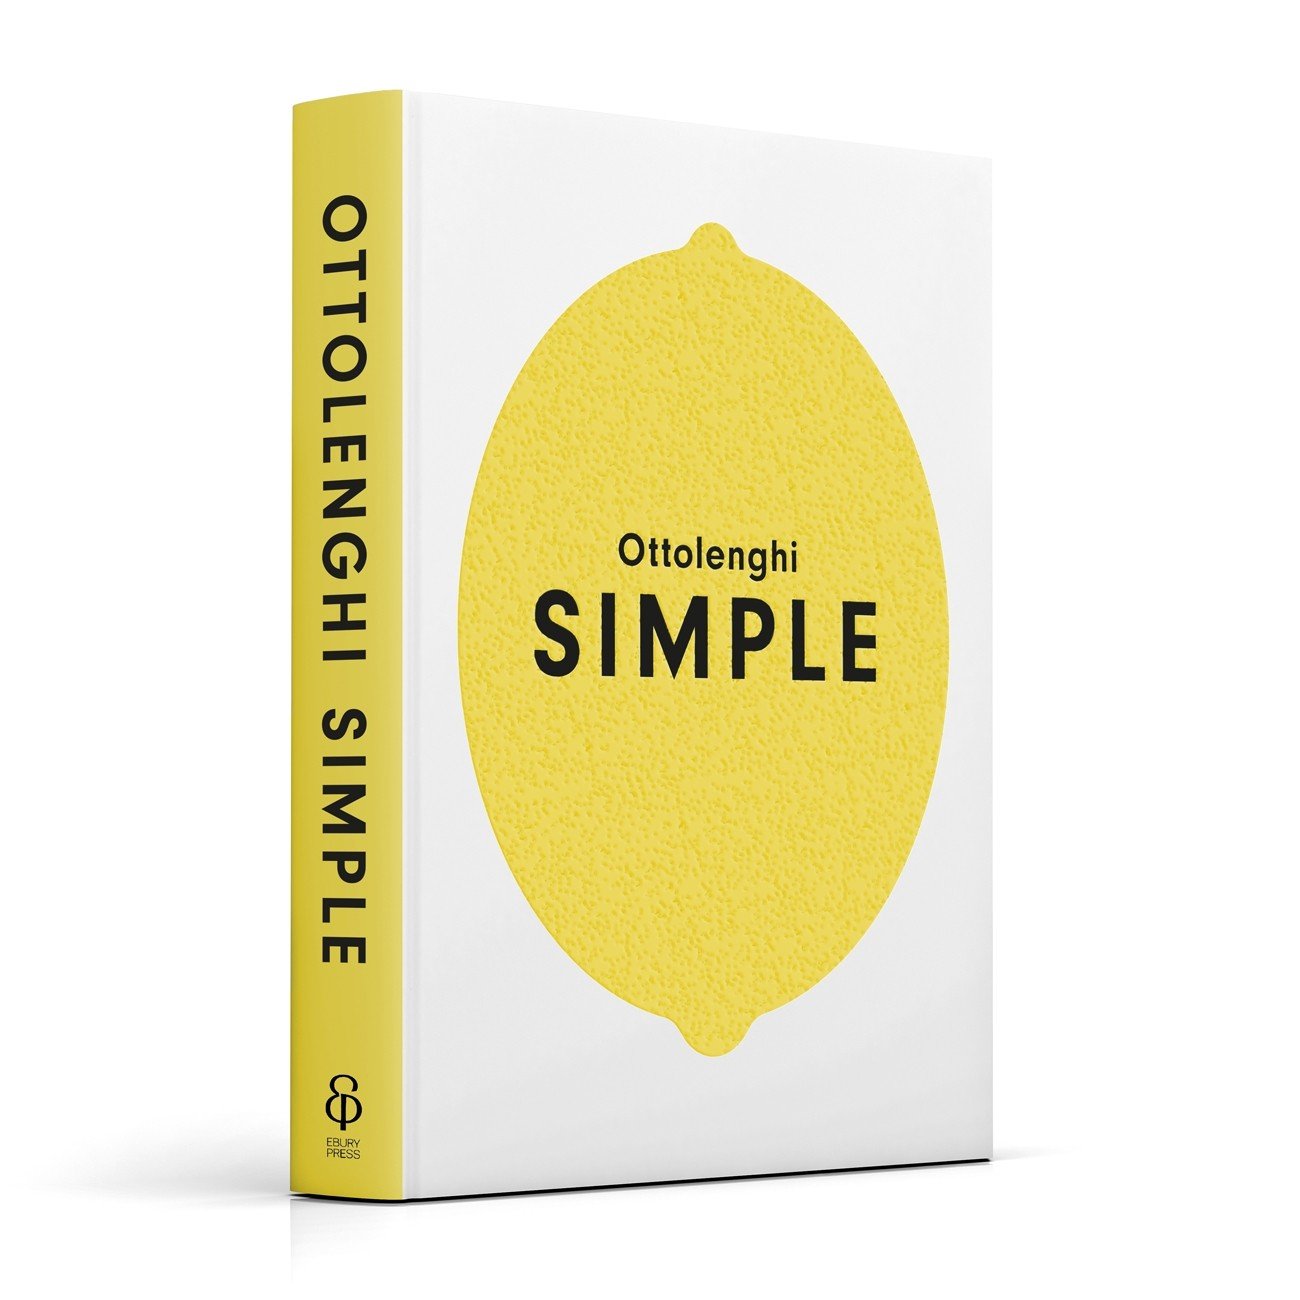 Ottolenghi Simple cookbook, $65, from Paper Plane